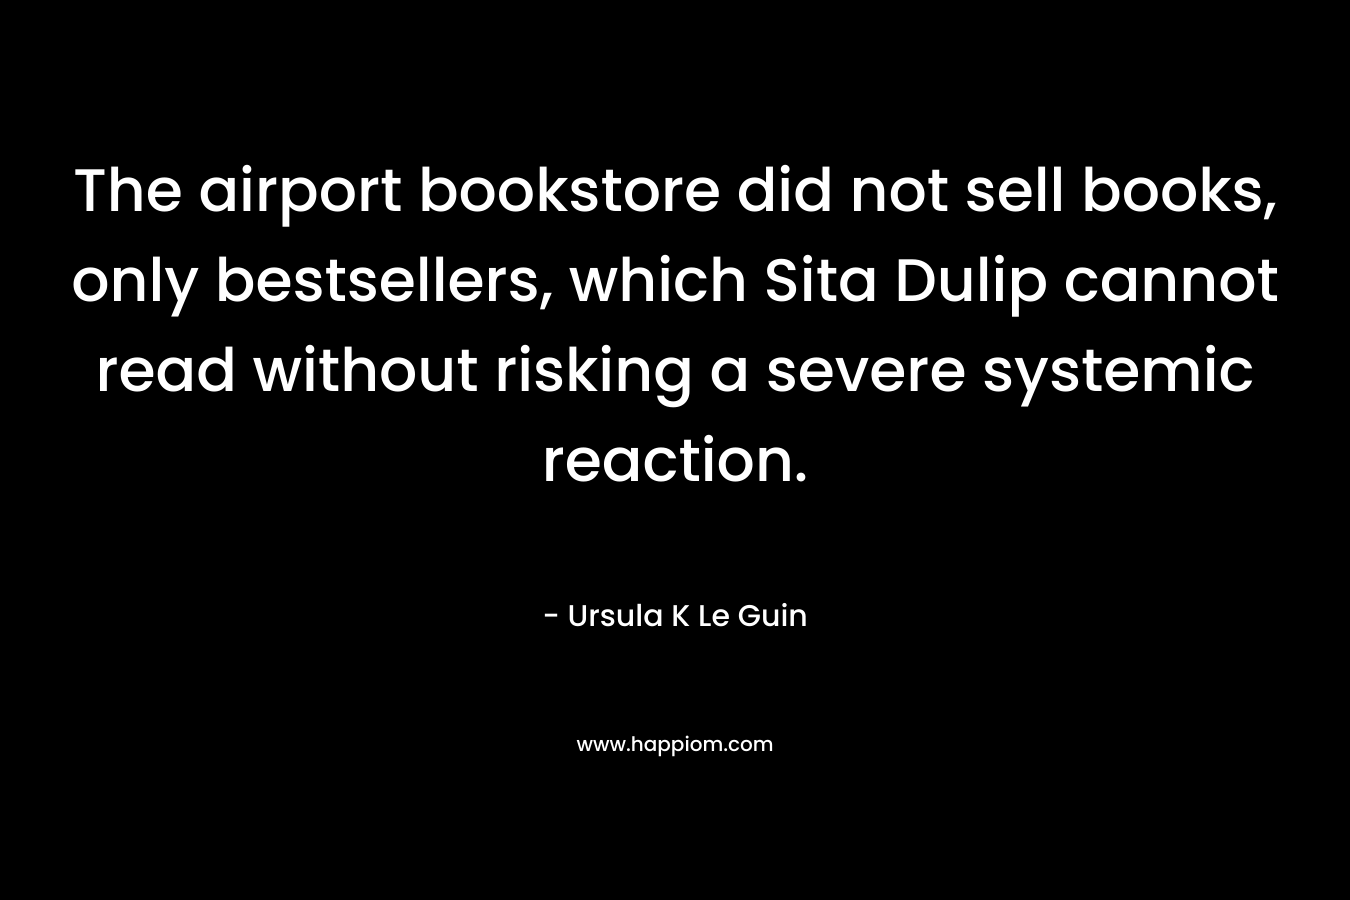 The airport bookstore did not sell books, only bestsellers, which Sita Dulip cannot read without risking a severe systemic reaction.